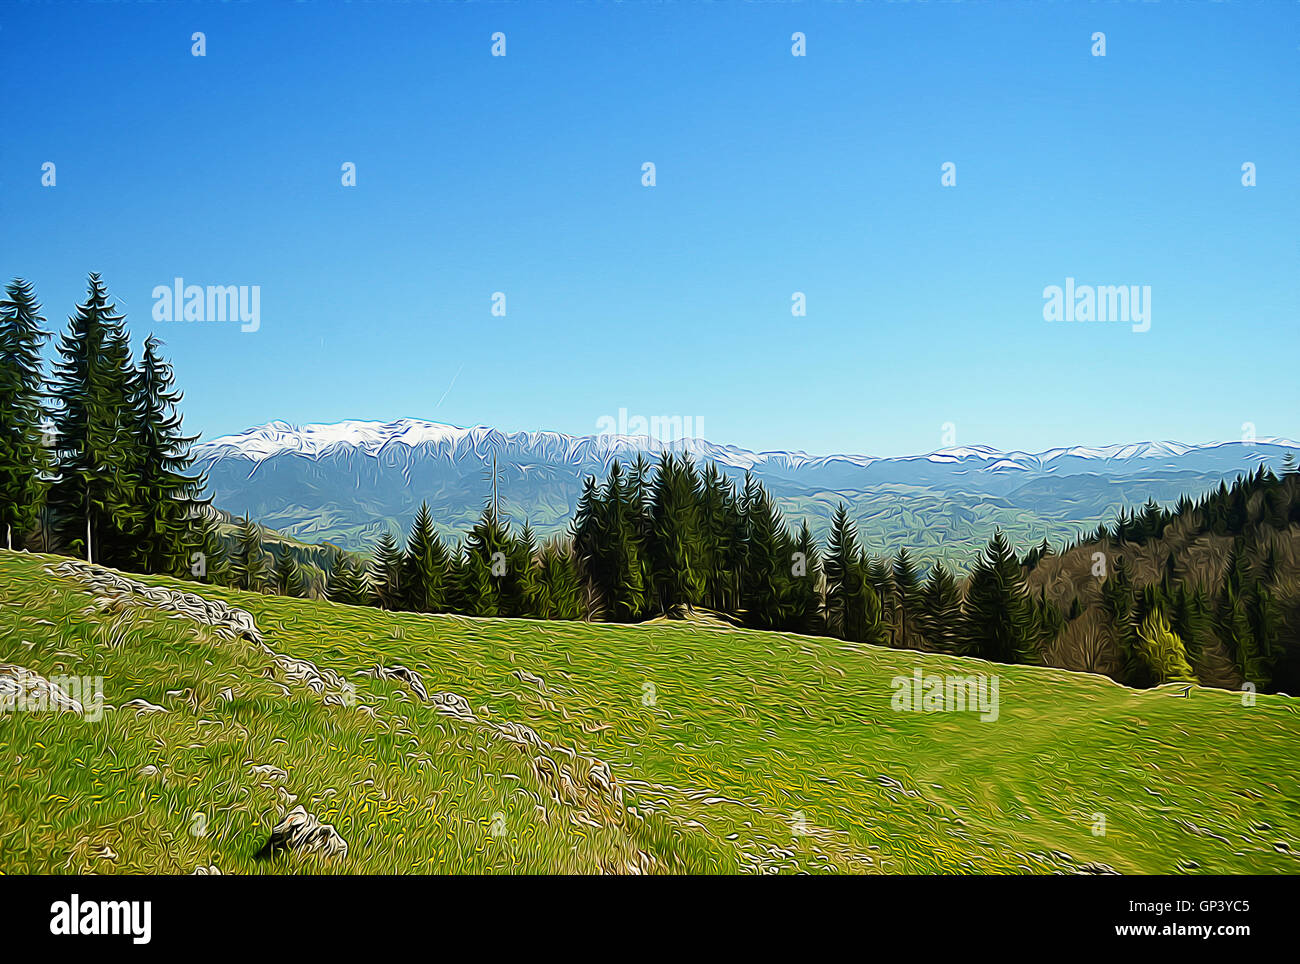 Illustration of spring mountain with fir forest on slope. Beautiful landscape with white peaks on far and a green field Stock Photo